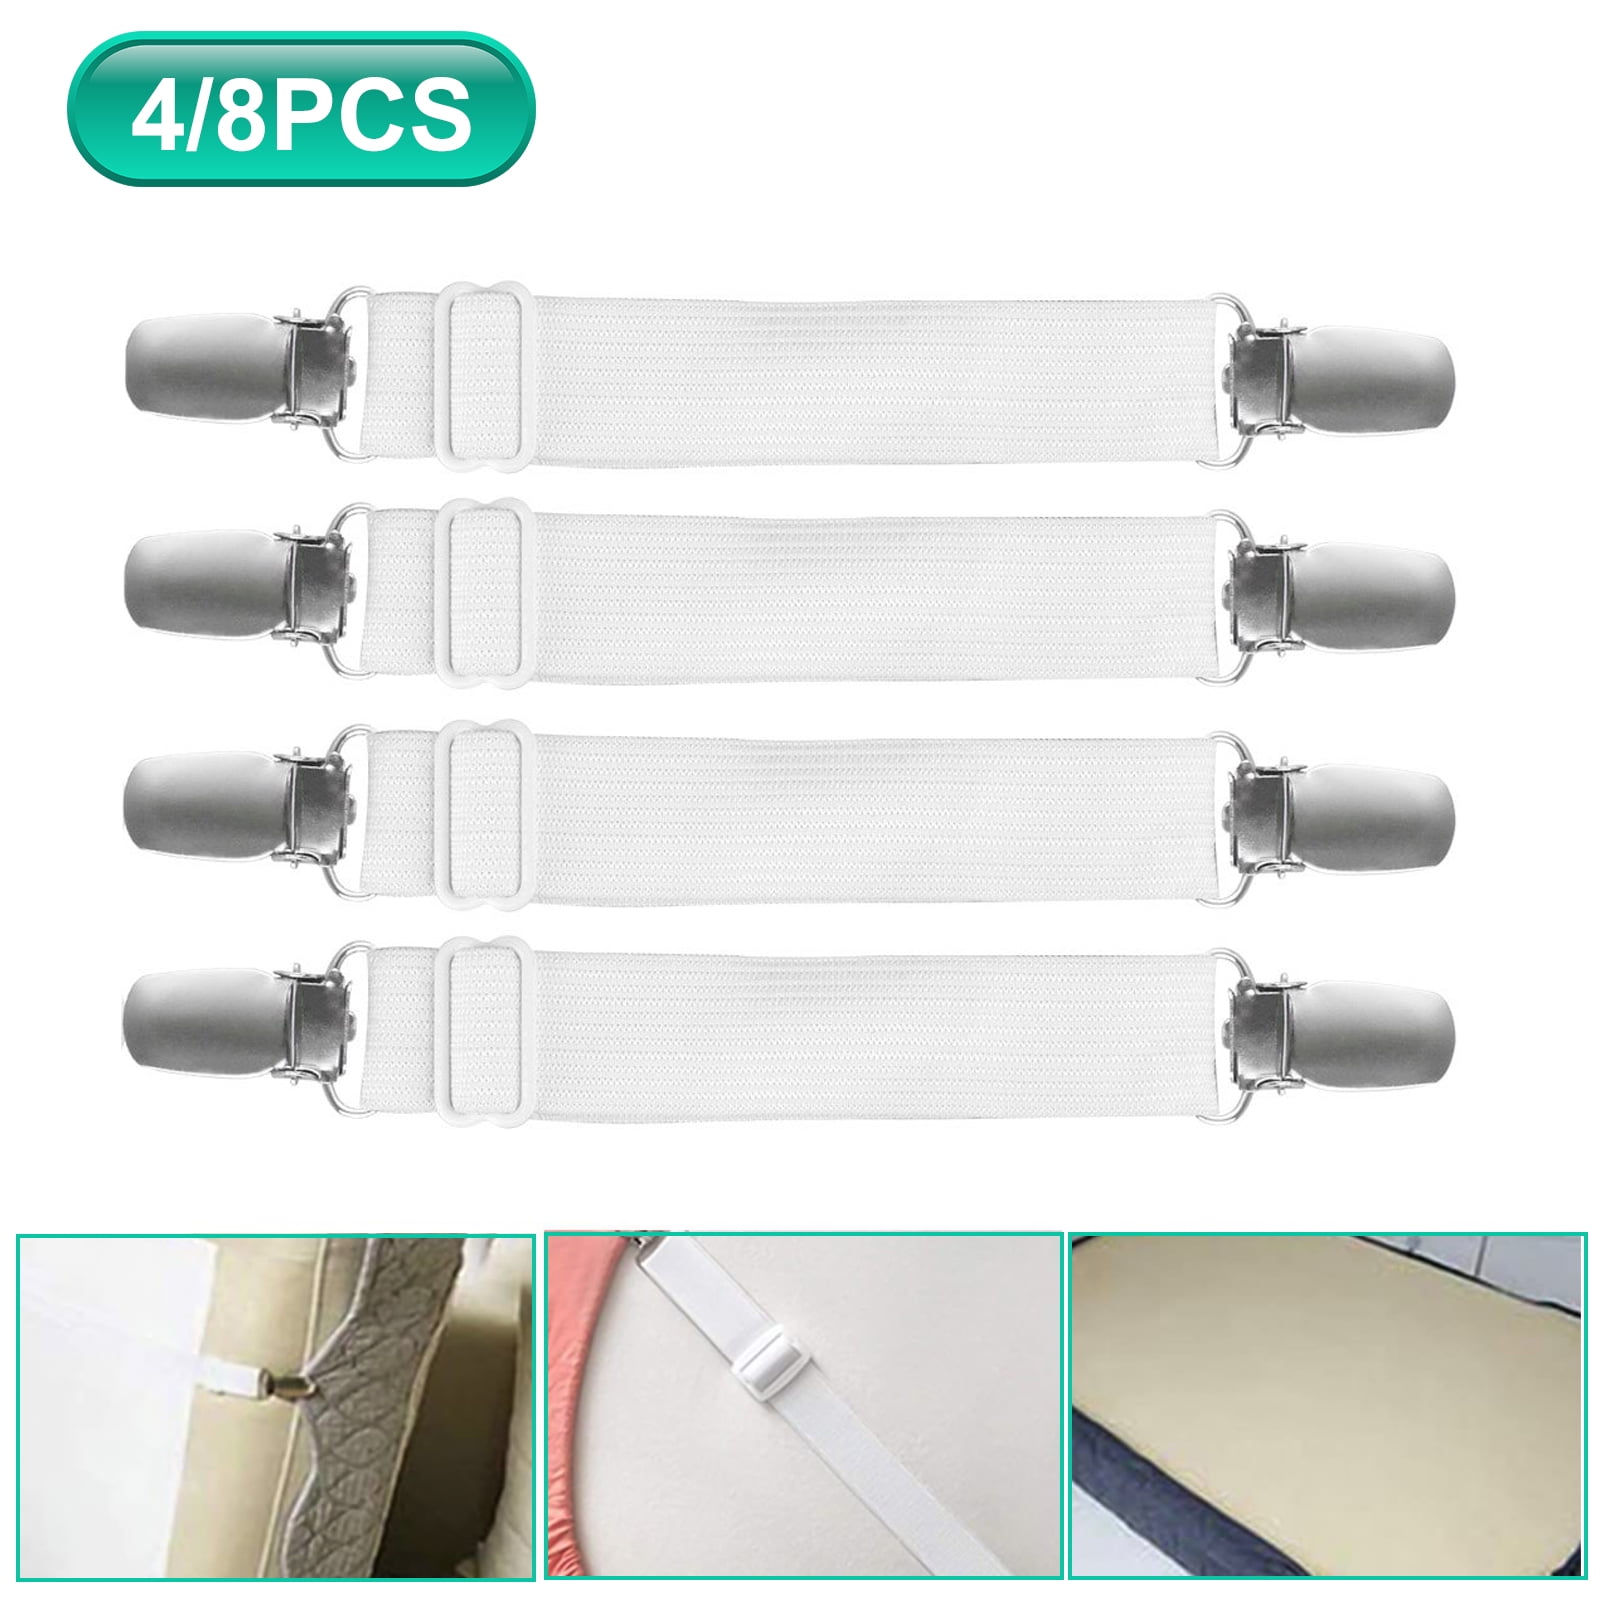 IRONING BOARD SHEET GRIPPERS 4PC STRAPS FASTENERS HOLD GRIPS ELASTIC CLIPS COVER 